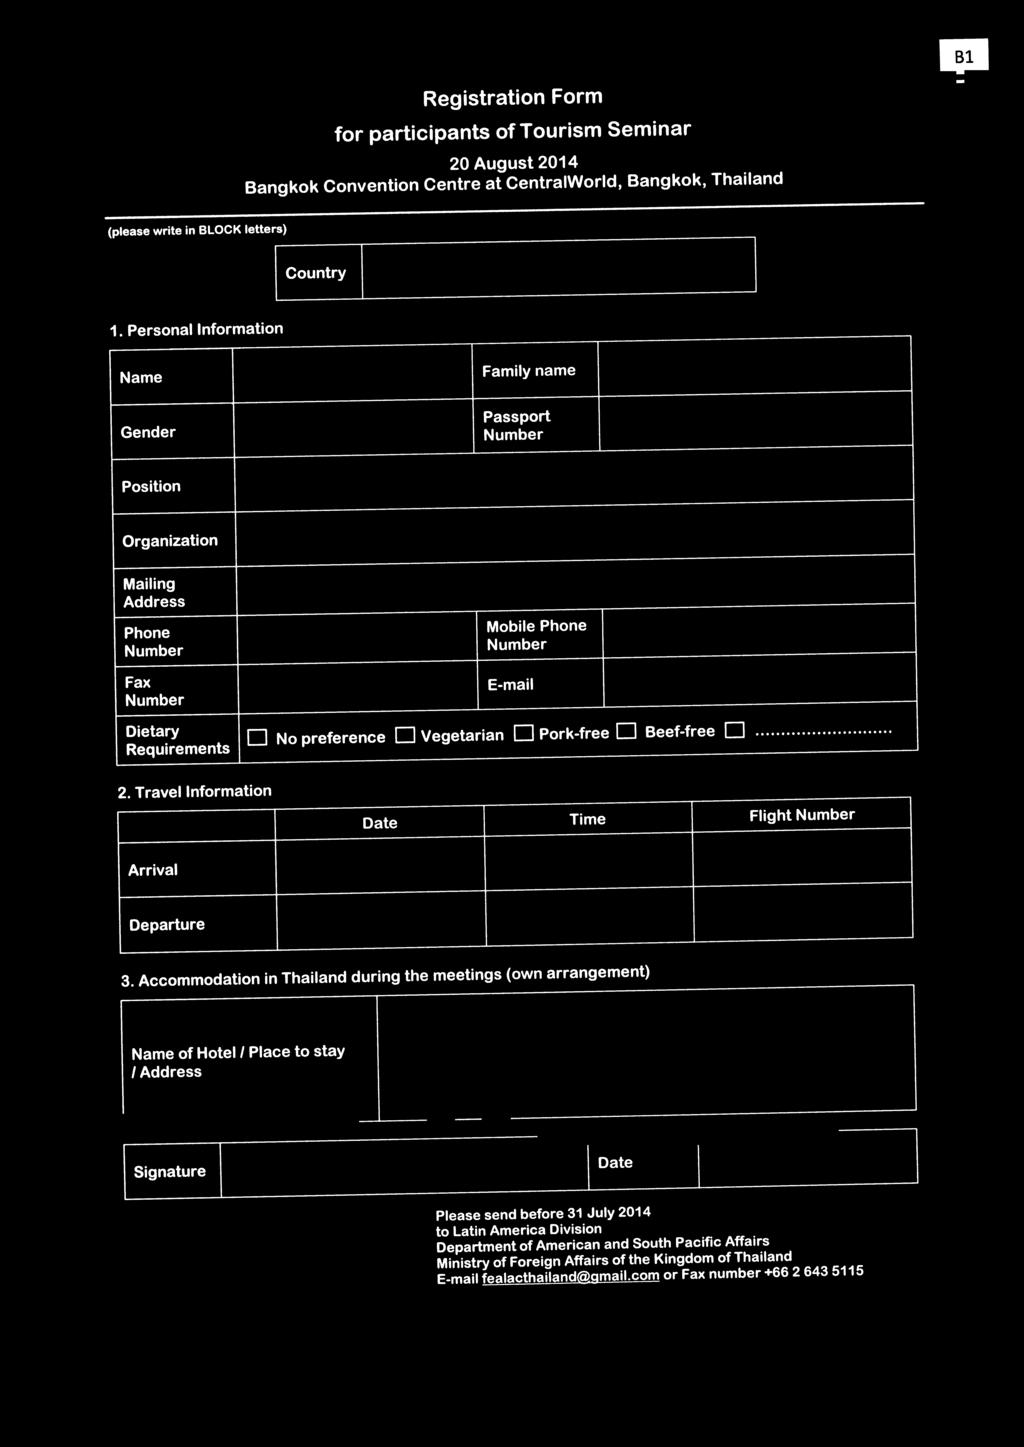 Registration Form for participants of Tourism Seminar 20 August 2014 Bangkok Convention Centre at CentraiWorld, Bangkok, Thailand (please write in BLOCK letters) I Country 1.